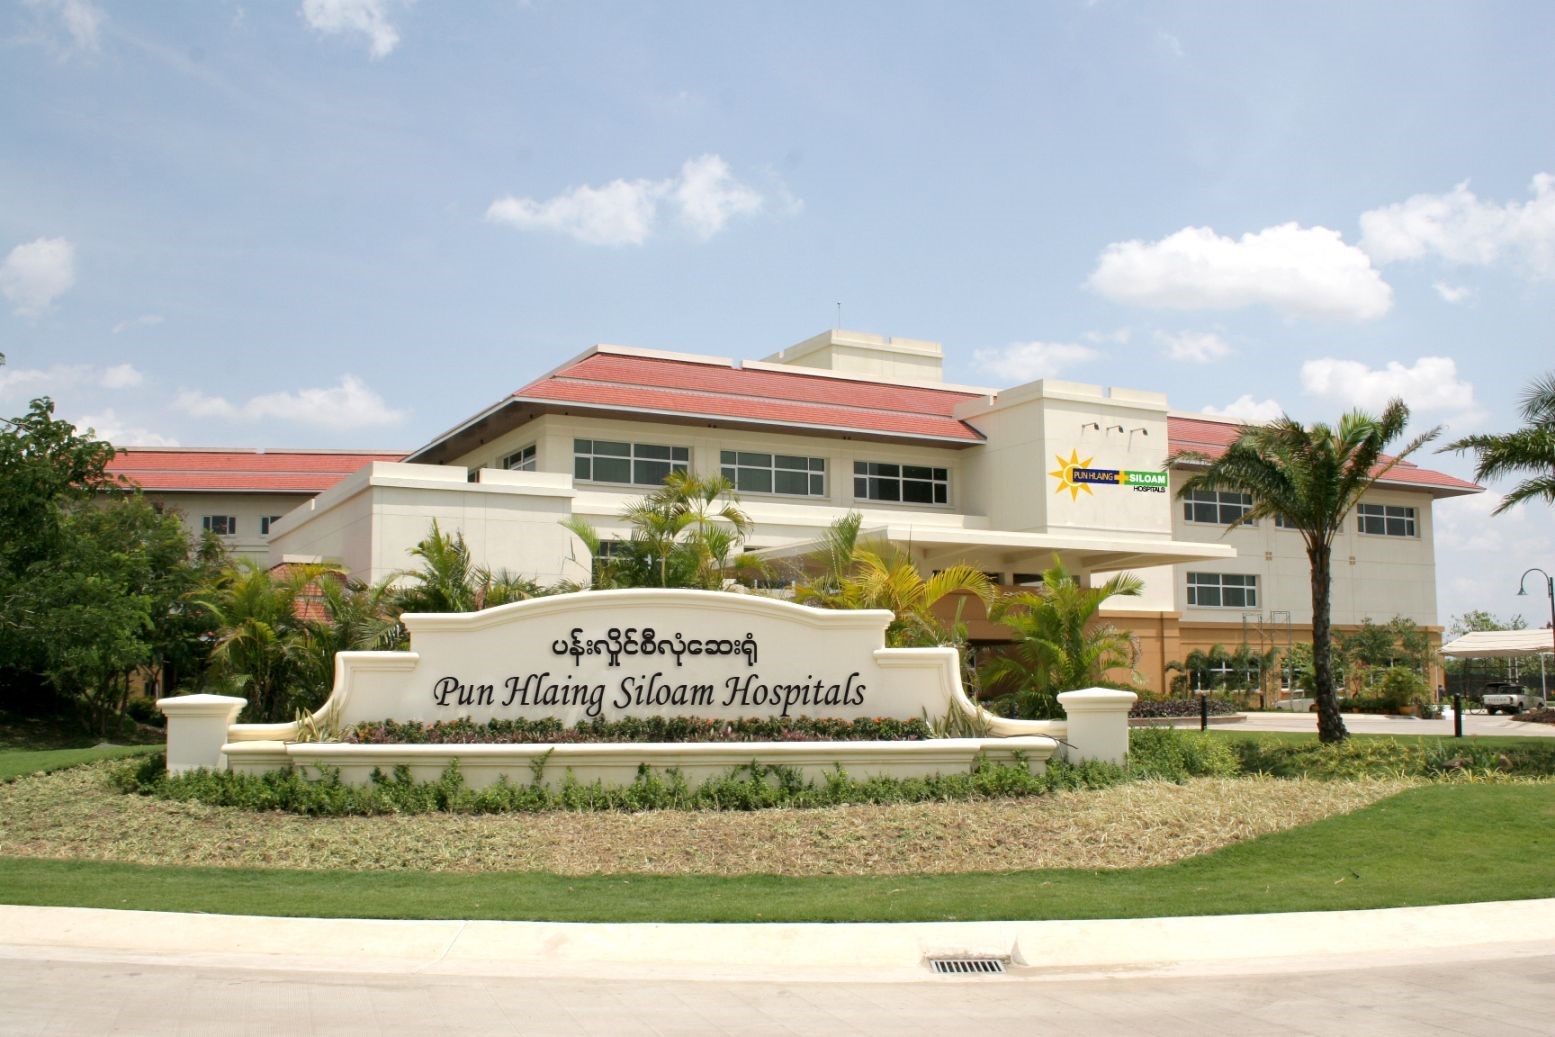 Pun Hlaing Hospital, Myanmar Permitted for Covid-19 Testing and Treatment